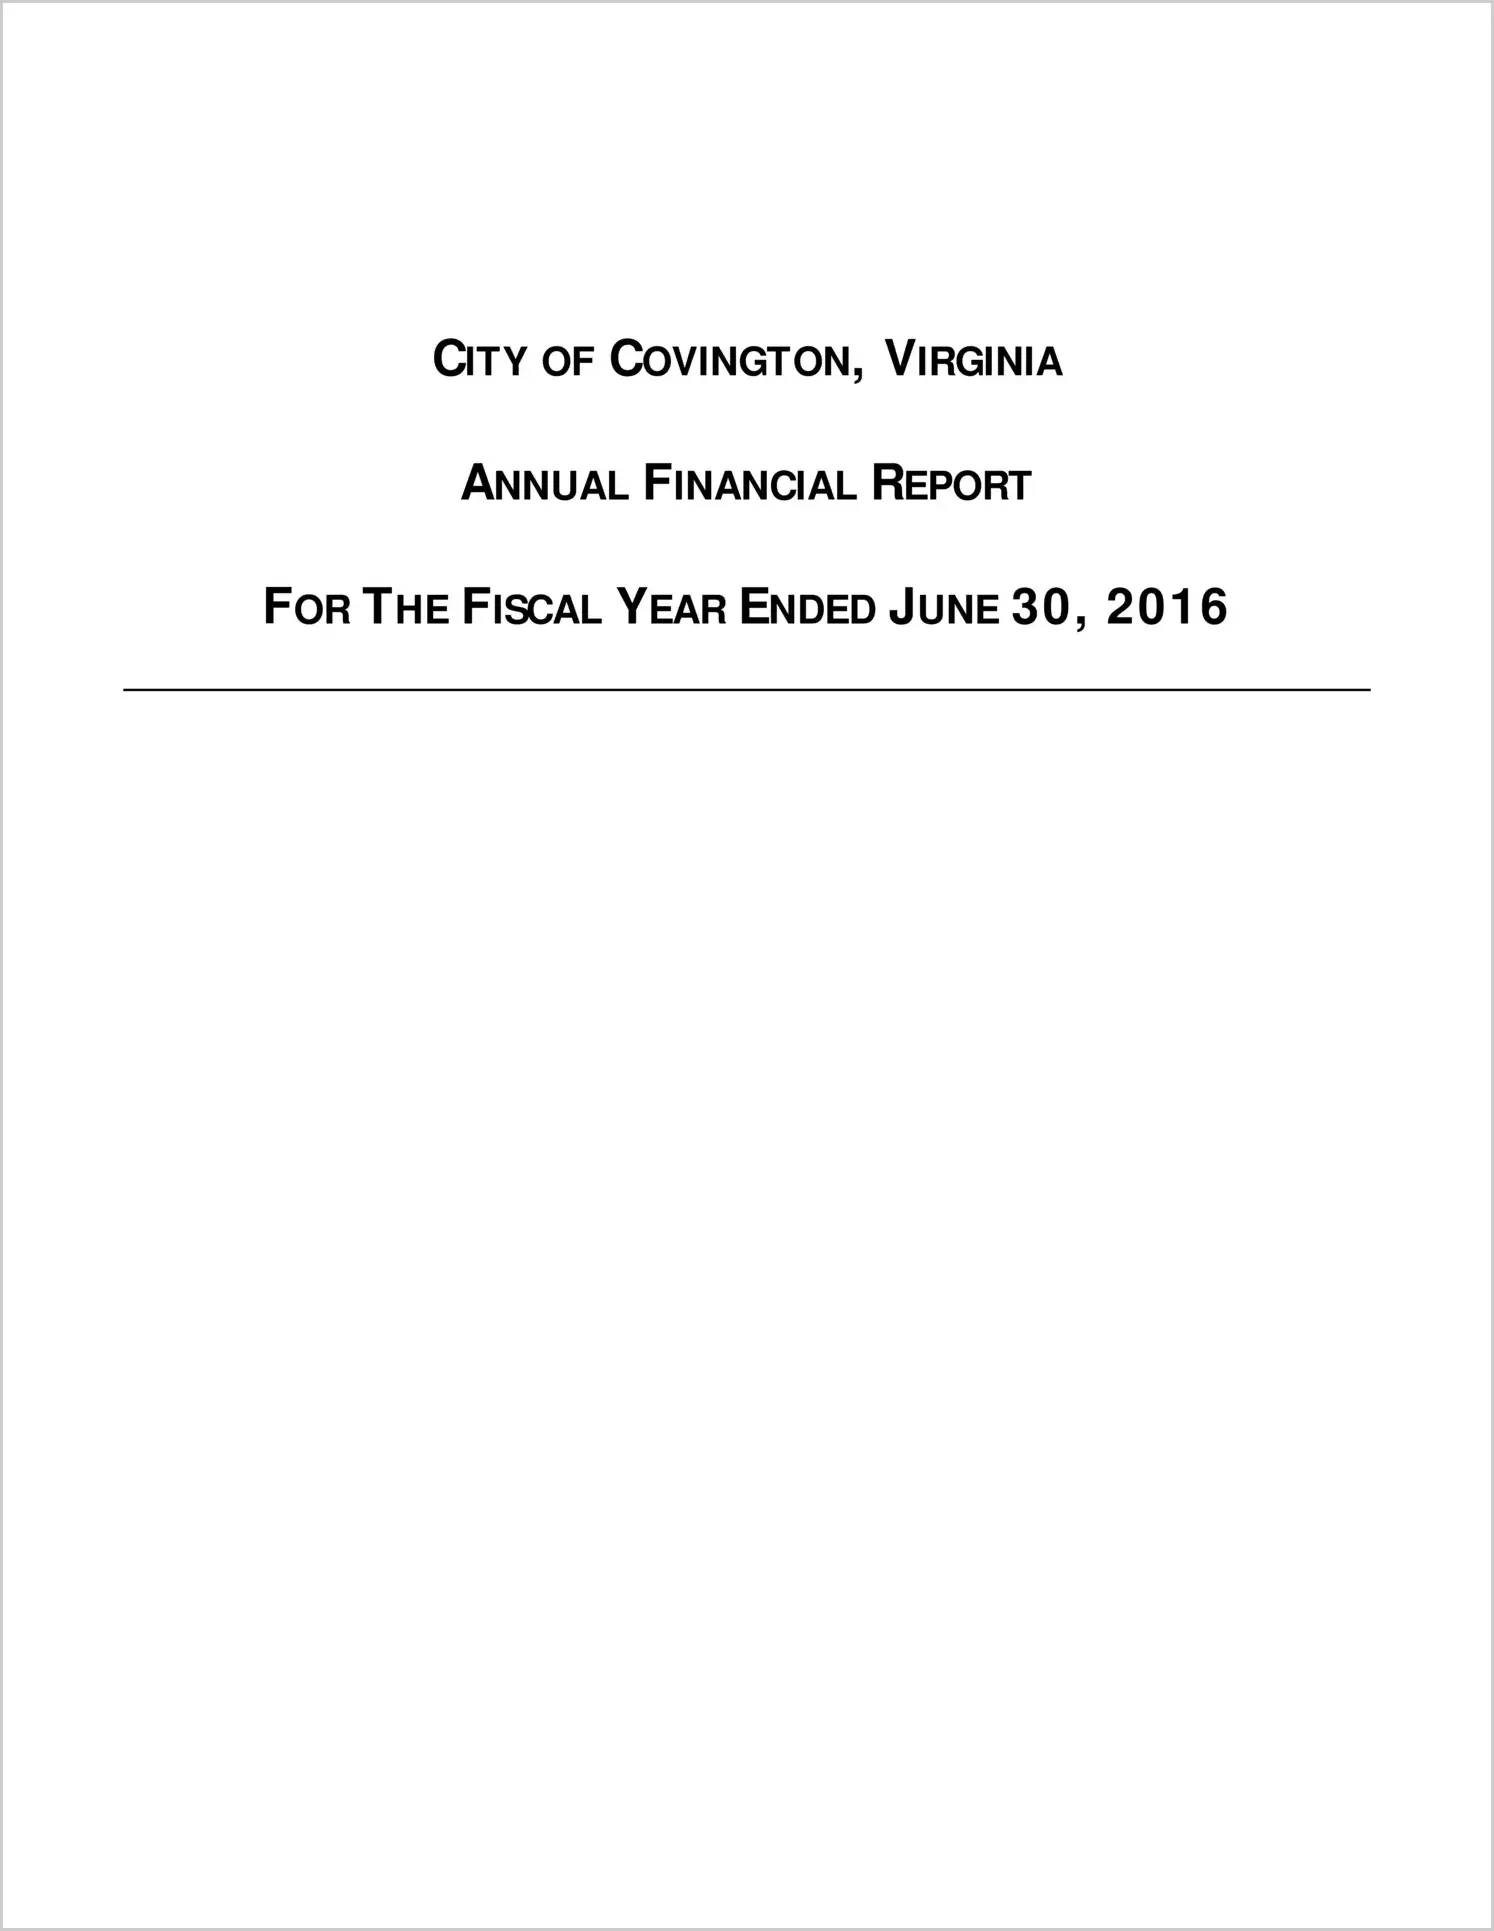 2016 Annual Financial Report for City of Covington